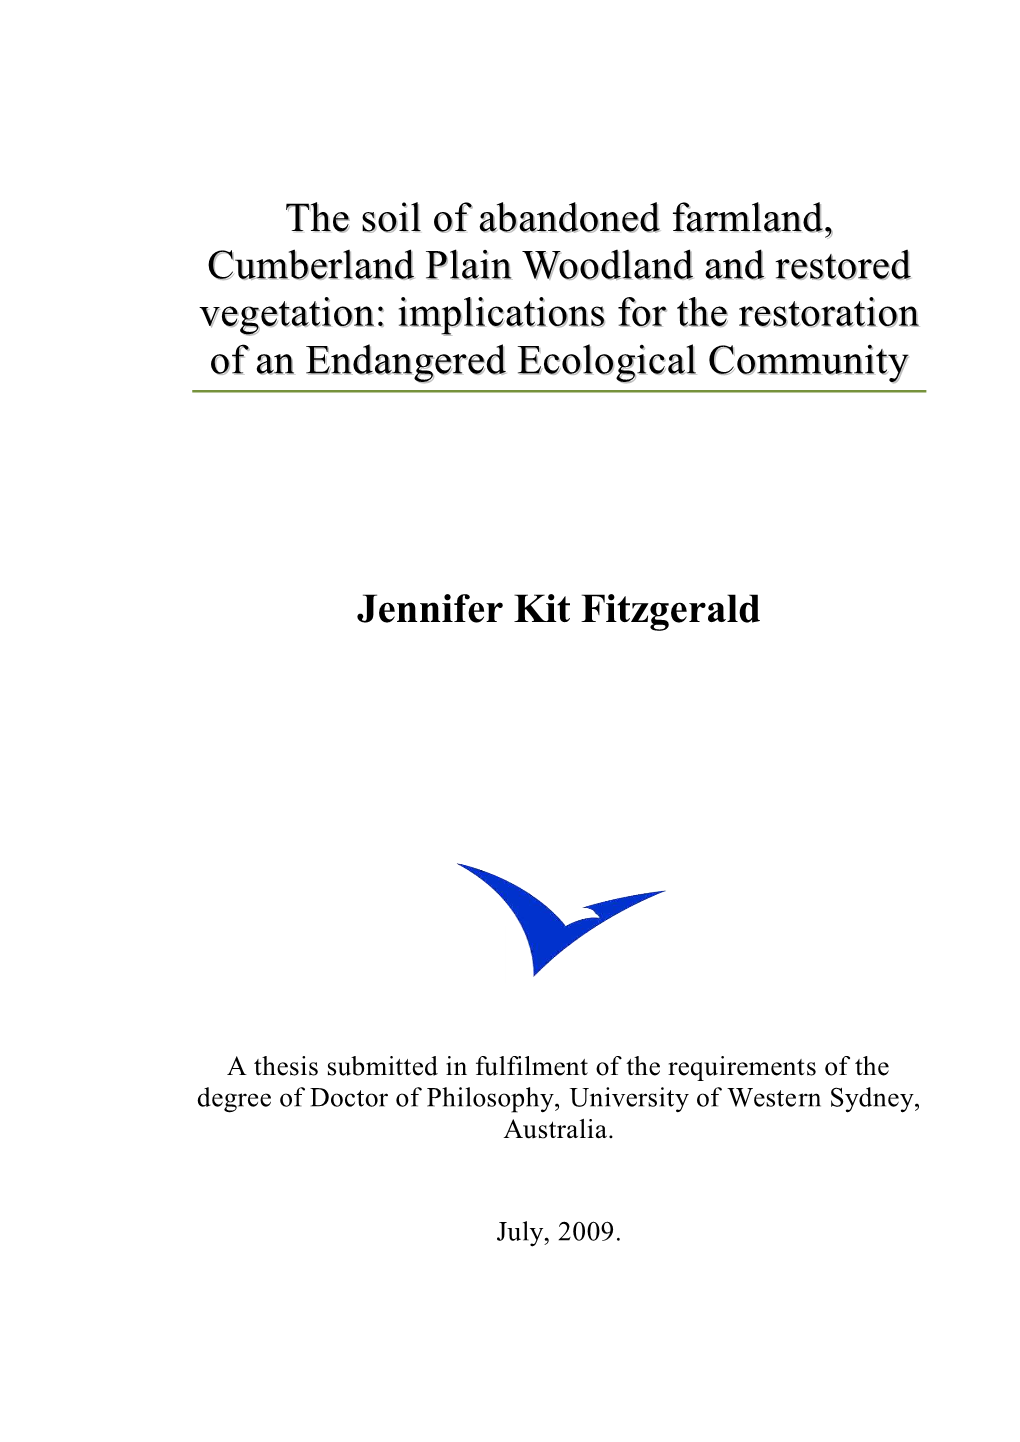 The Soil of Abandoned Farmland, Cumberland Plain Woodland and Restored Vegetation: Implications for the Restoration of an Endangered Ecological Community